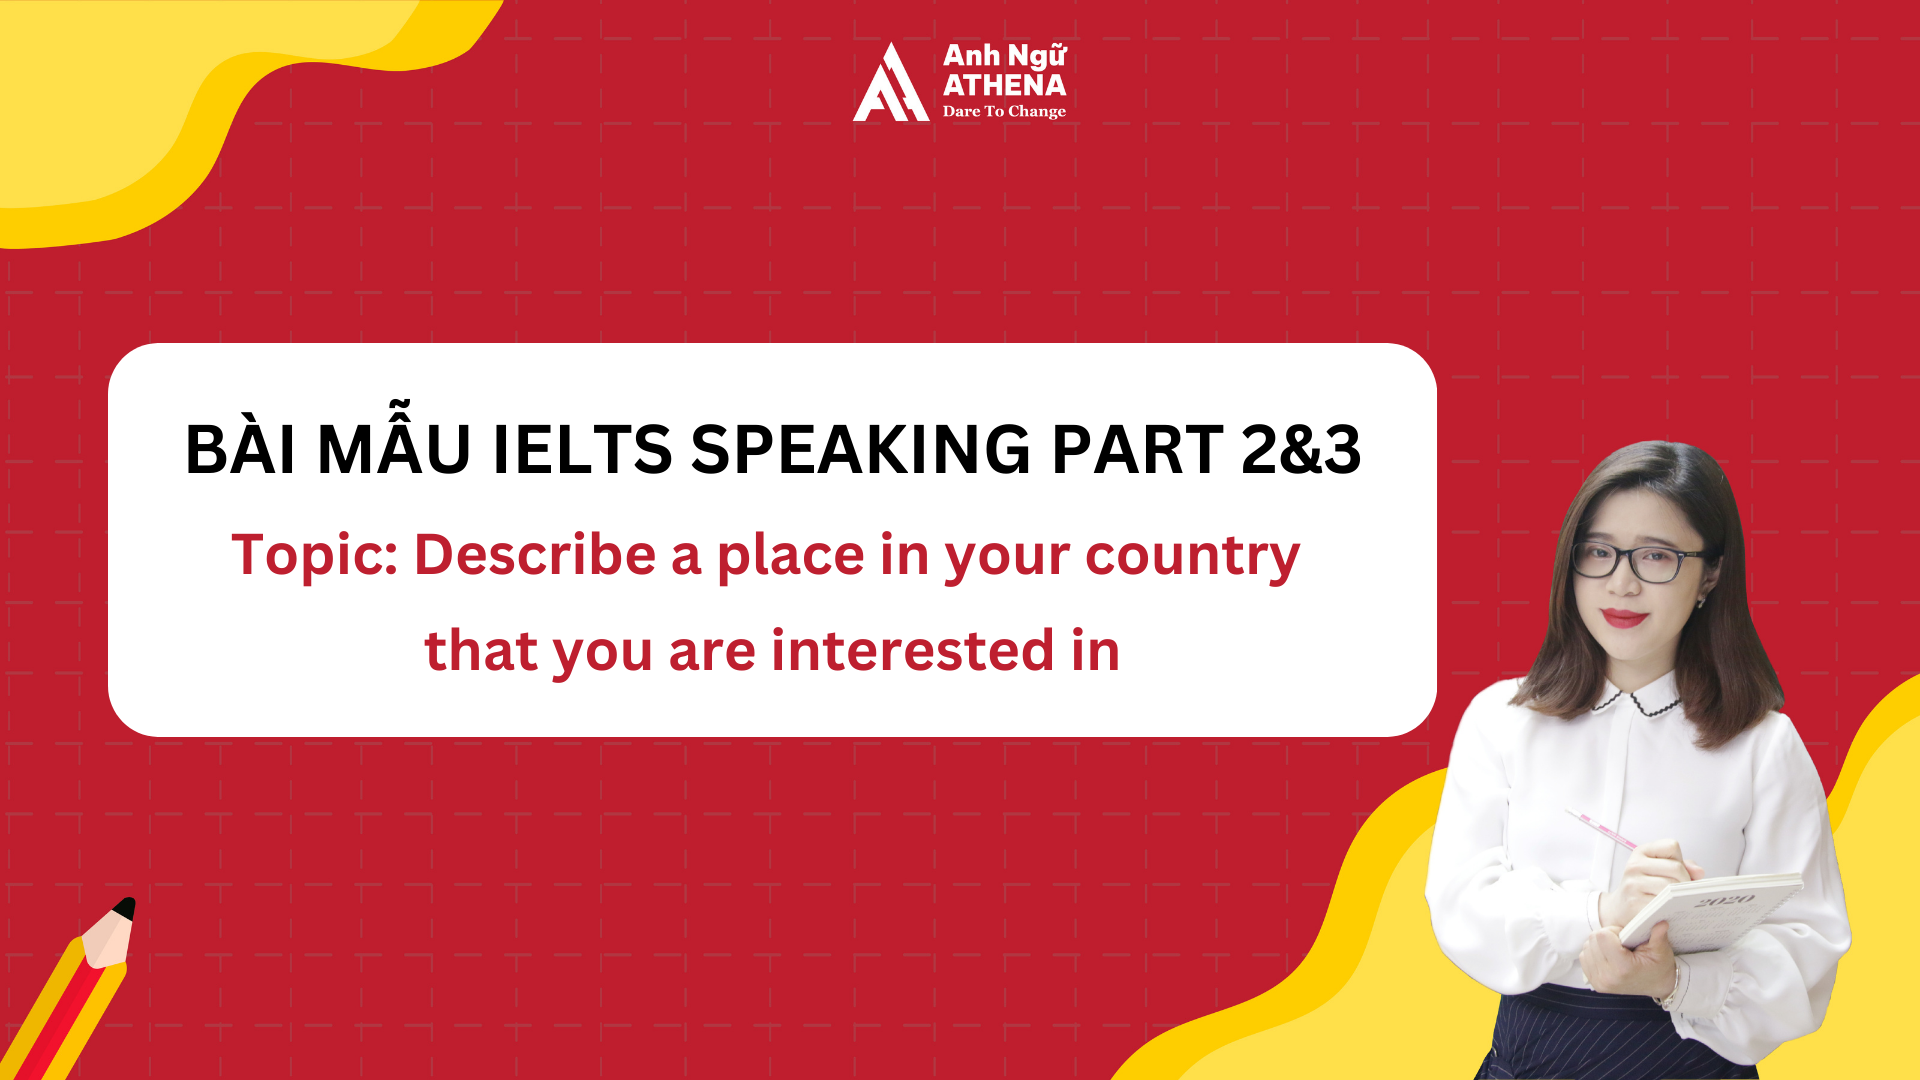 Bài mẫu IELTS Speaking Part 2 & 3 - Describe a place in your country that you are interested in